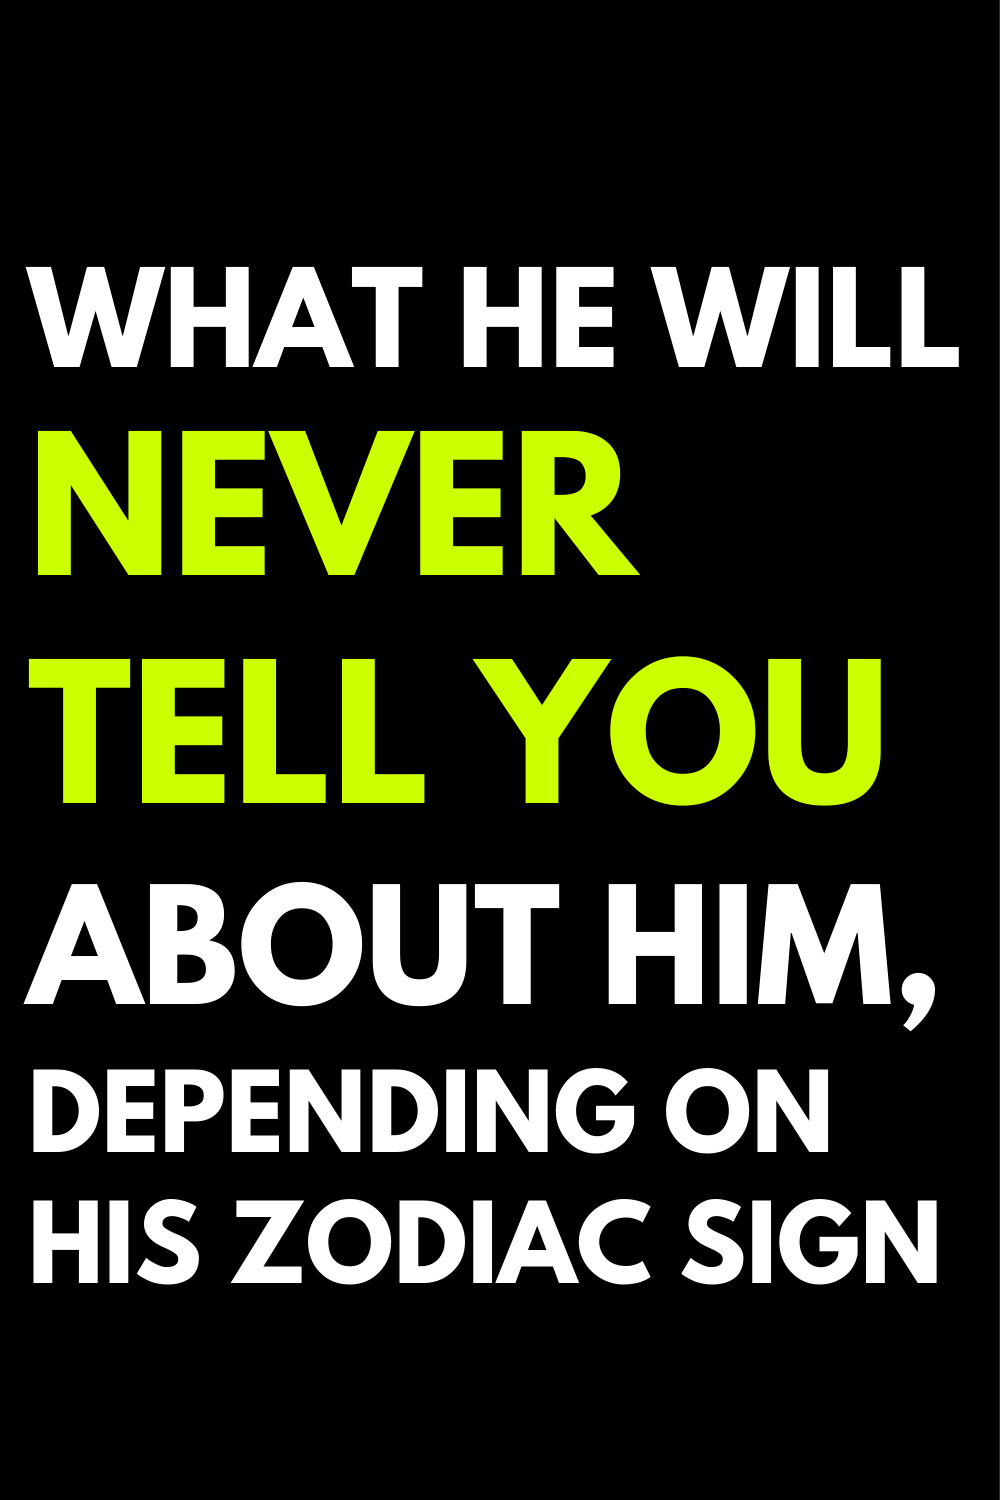 What he will never tell you about him, depending on his zodiac sign